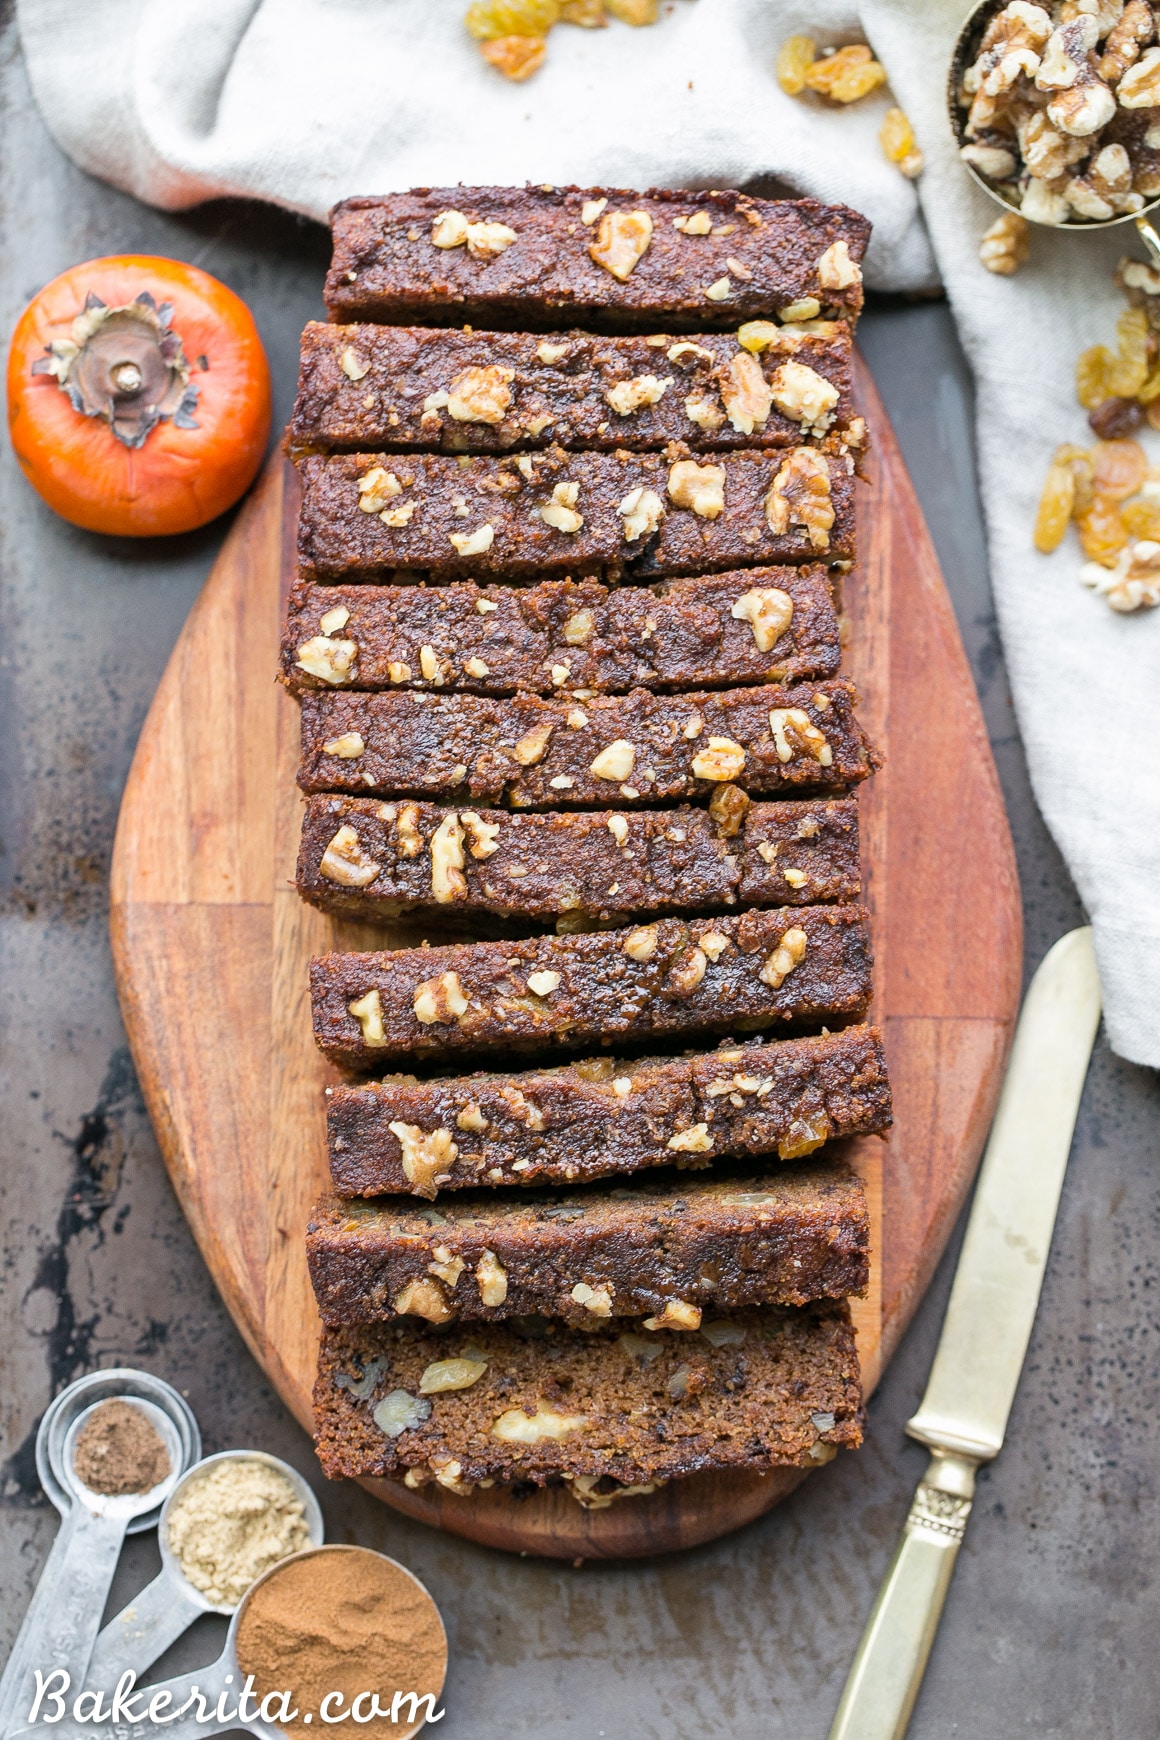 This Paleo Persimmon Bread is a healthy treat that uses pureed Fuyu persimmons for flavor and moisture, and is loaded with toasted walnuts & golden raisins! This gluten-free persimmon bread is spiced with cinnamon, ginger and allspice and makes a perfect breakfast or snack.